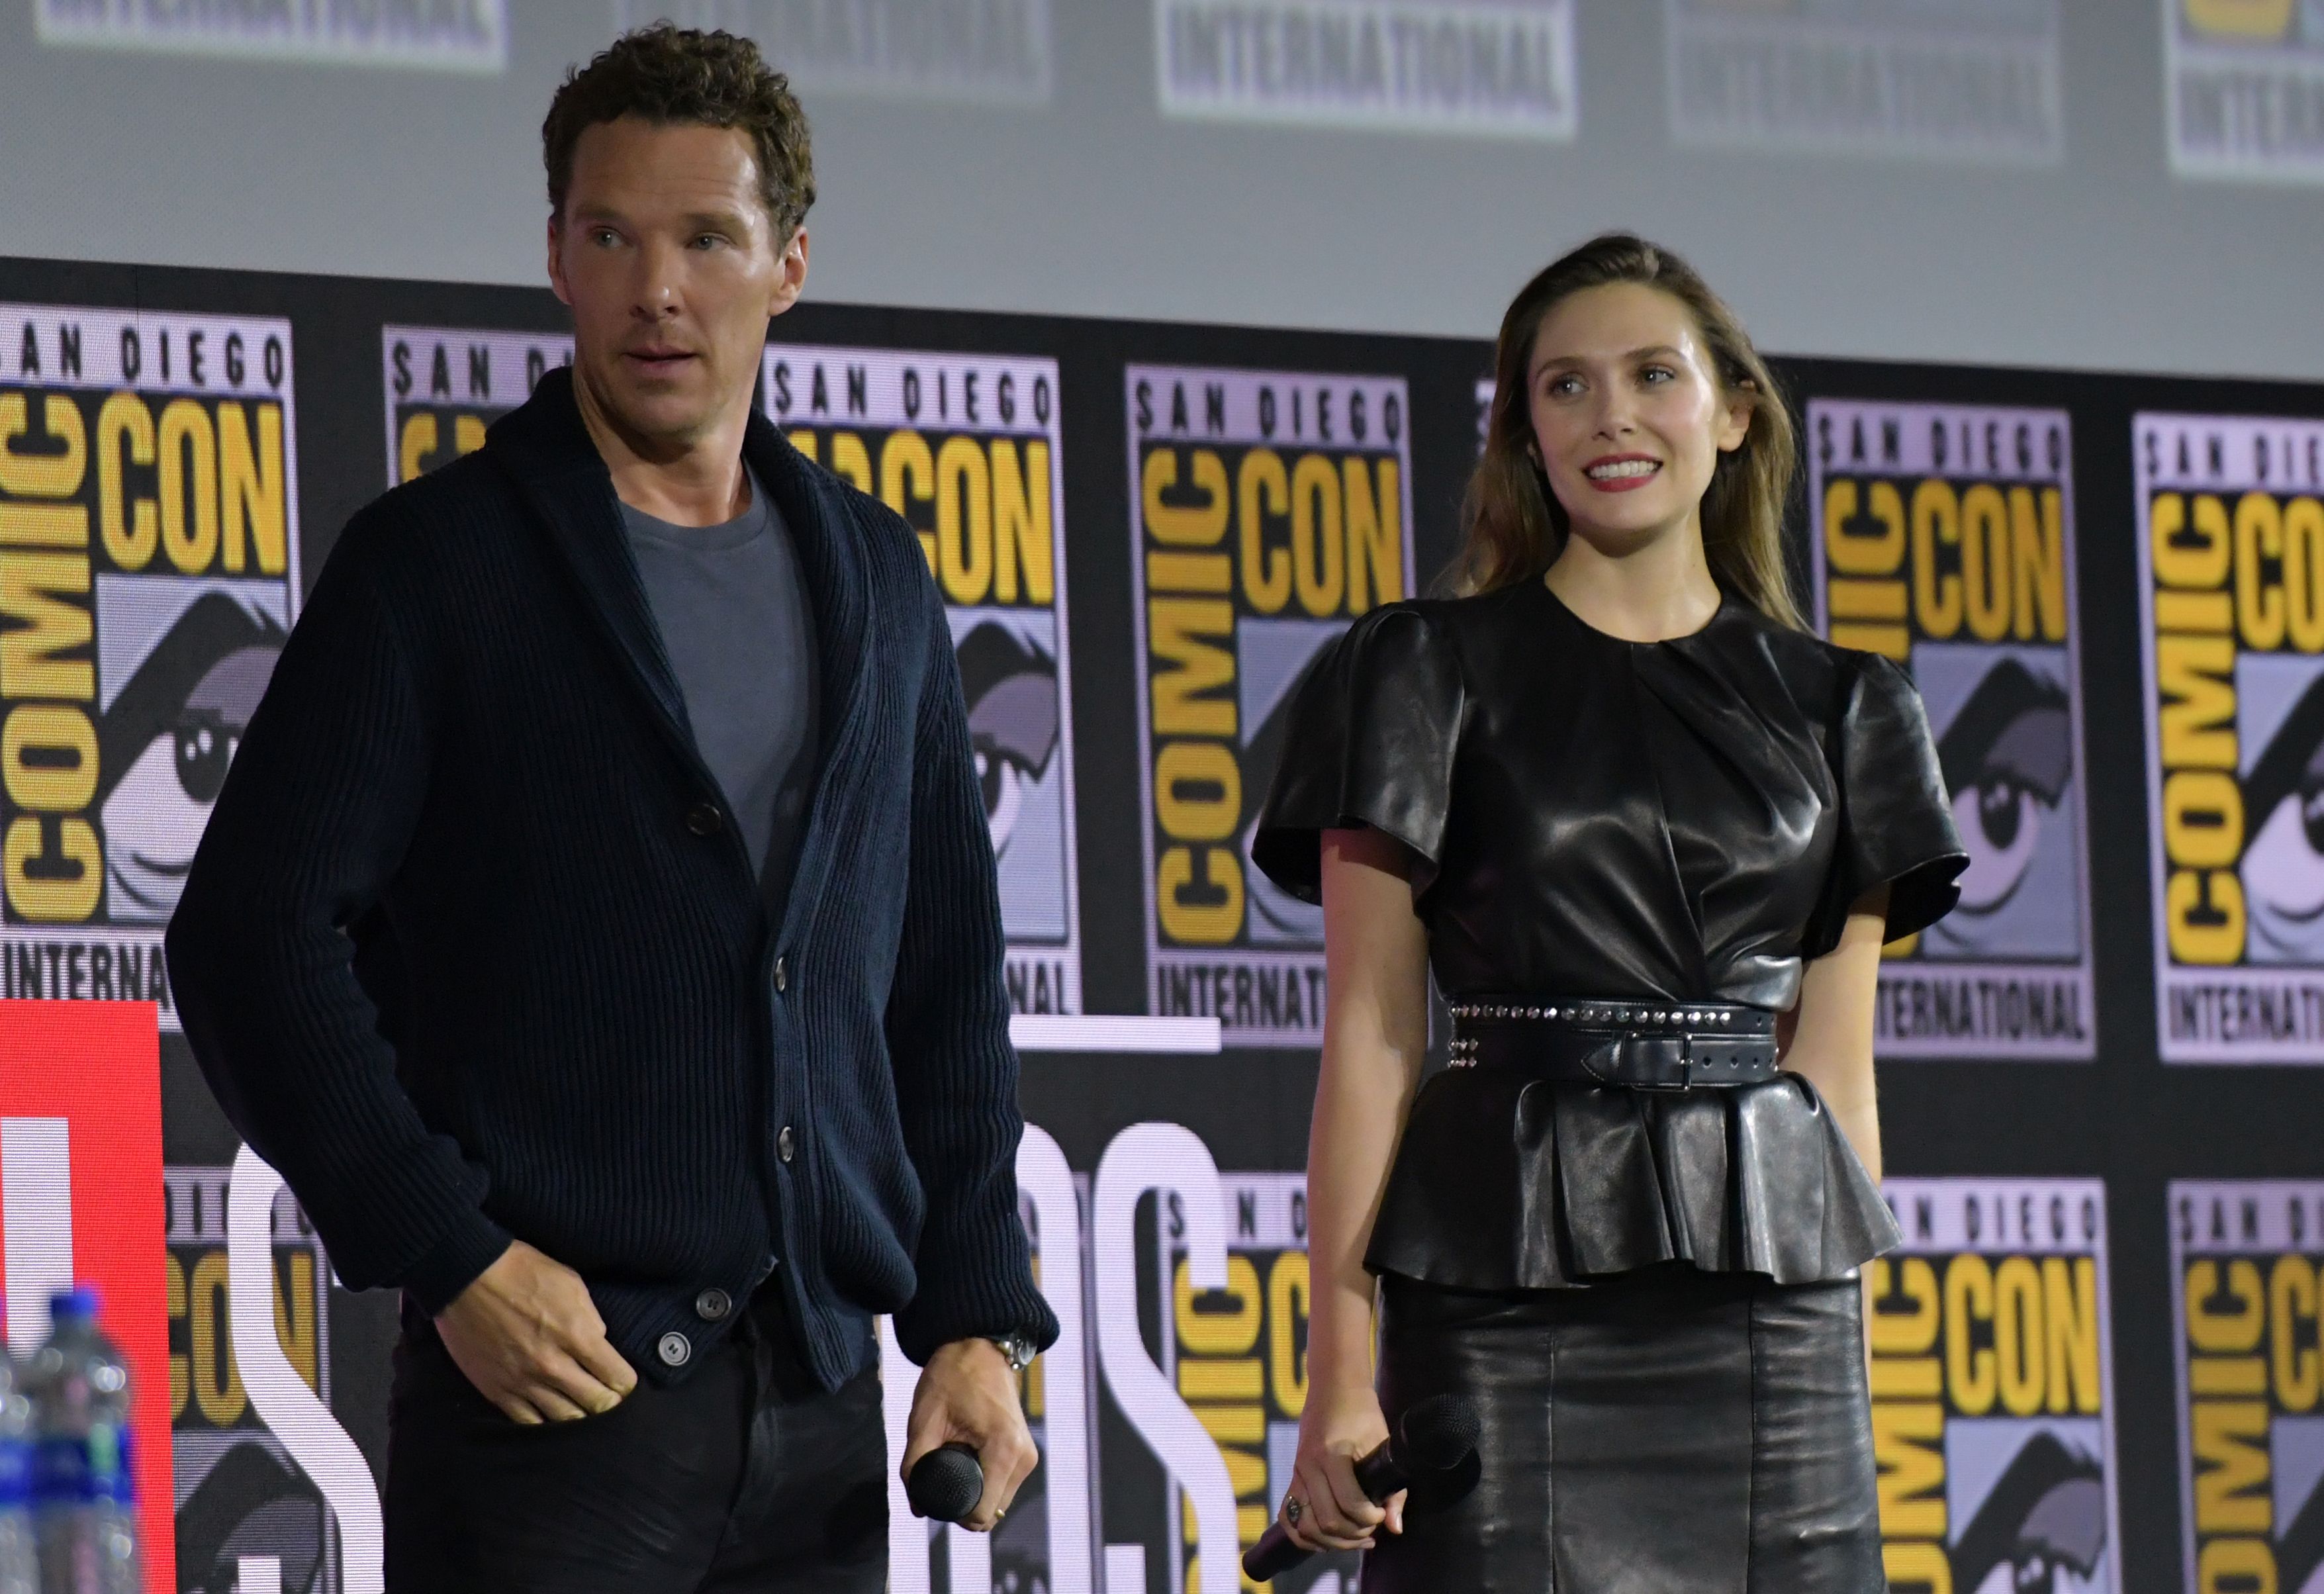 Benedict Cumberbatch and Elizabeth Olsen, who star as Doctor Strange and Wanda Maximoff in 'Doctor Strange 2,' stand onstage at Comic Con. Cumberbatch wears a dark blue cardigan over a blue shirt and black pants. Olsen wears a black leather shirt over a black leather skirt.